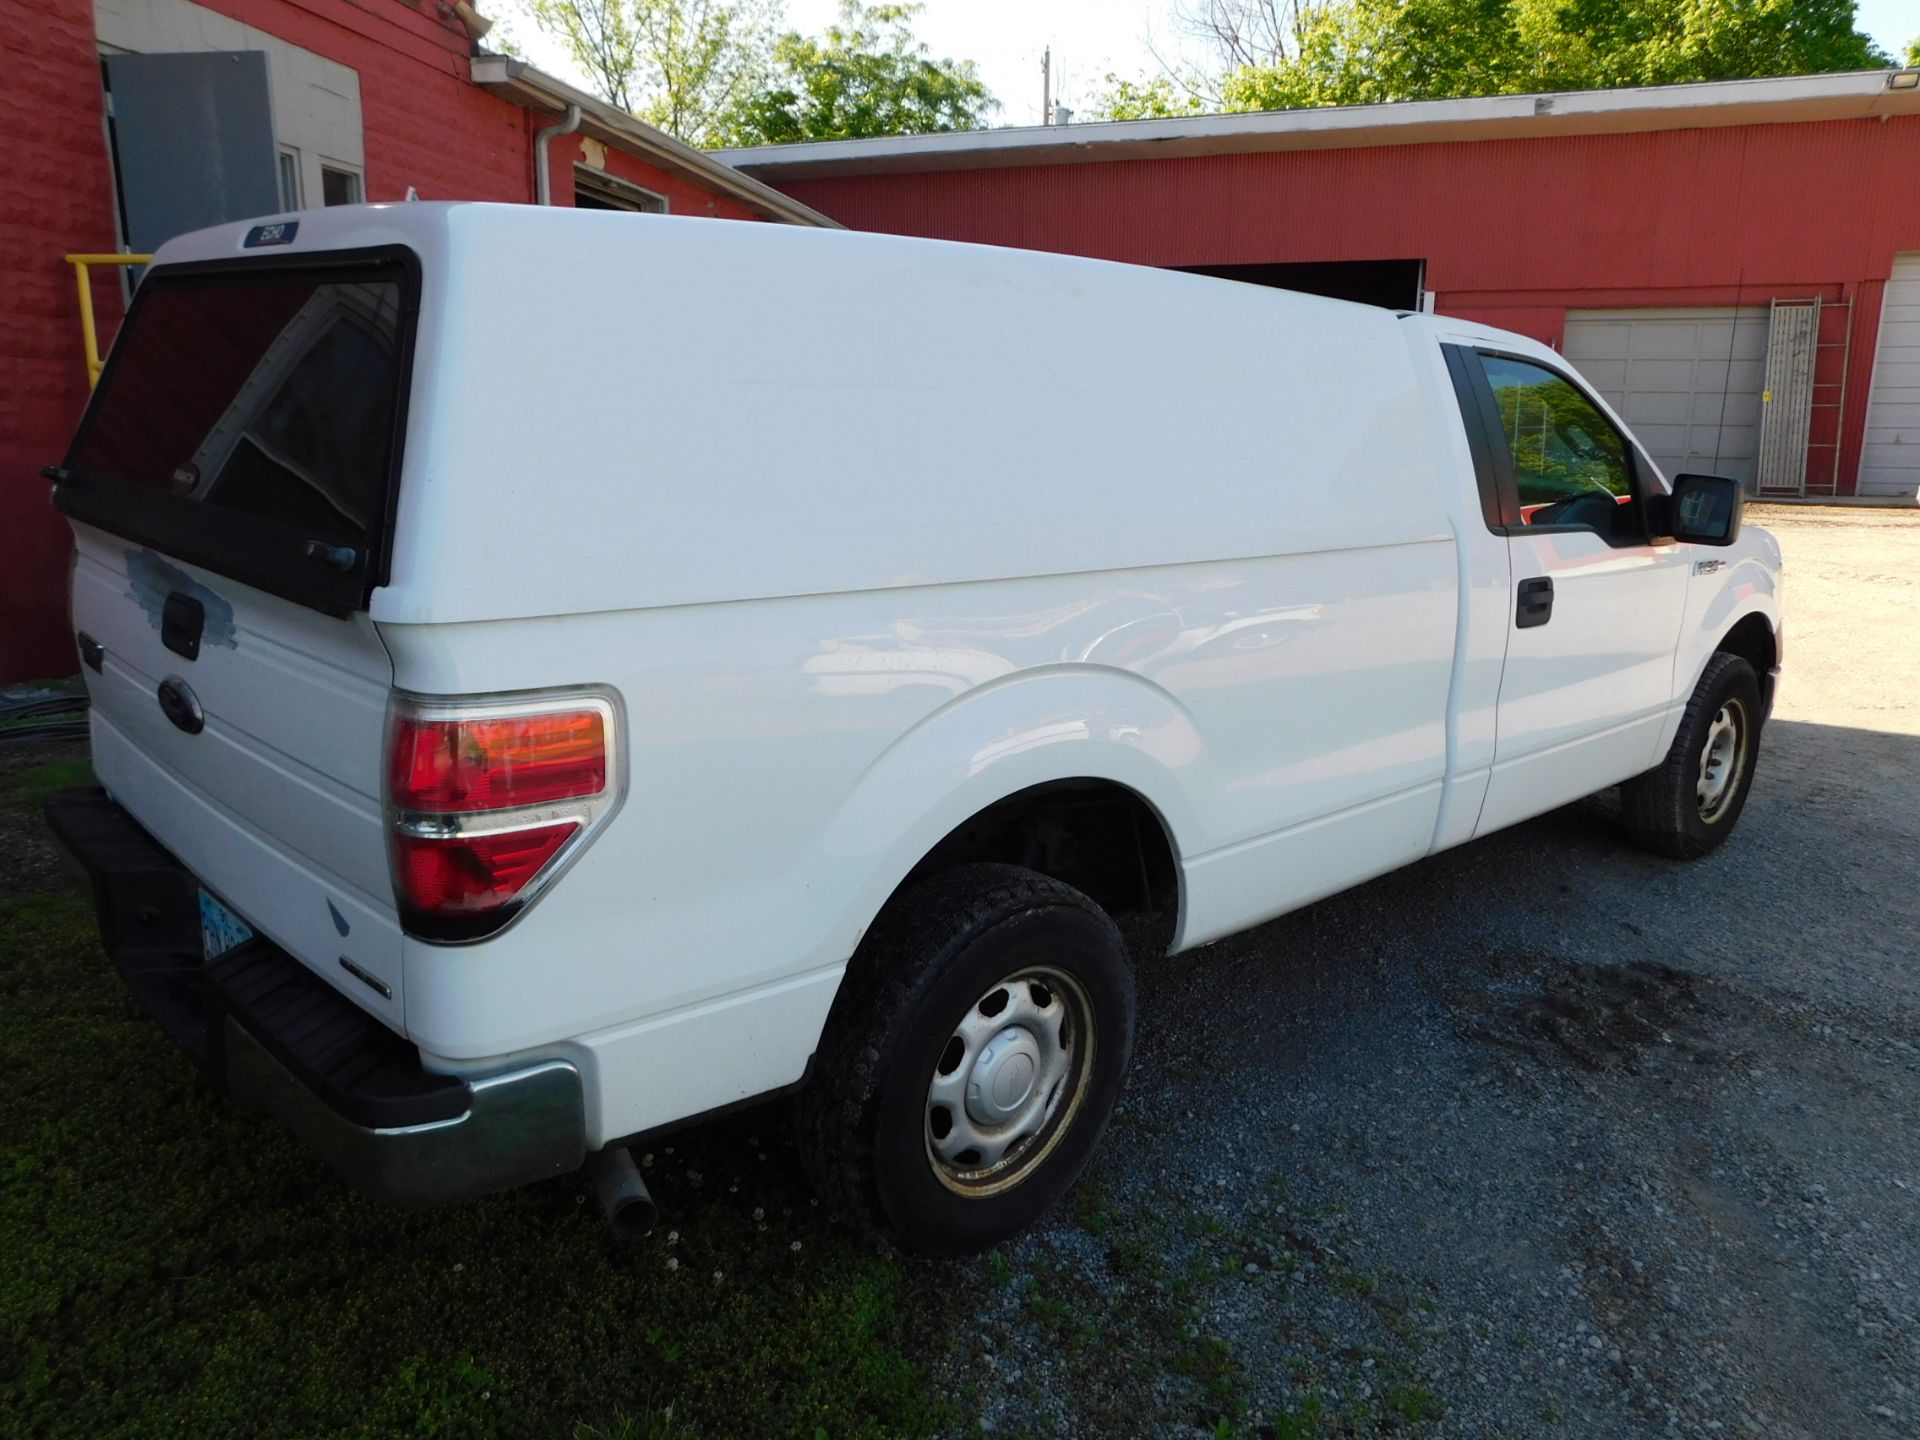 2011 Ford Pick up F-150XL vin 1FTMF1CM3CKD12942, Automatic Transmission, PW, Pl, 8'Bed w/Cap 146,289 - Image 6 of 46